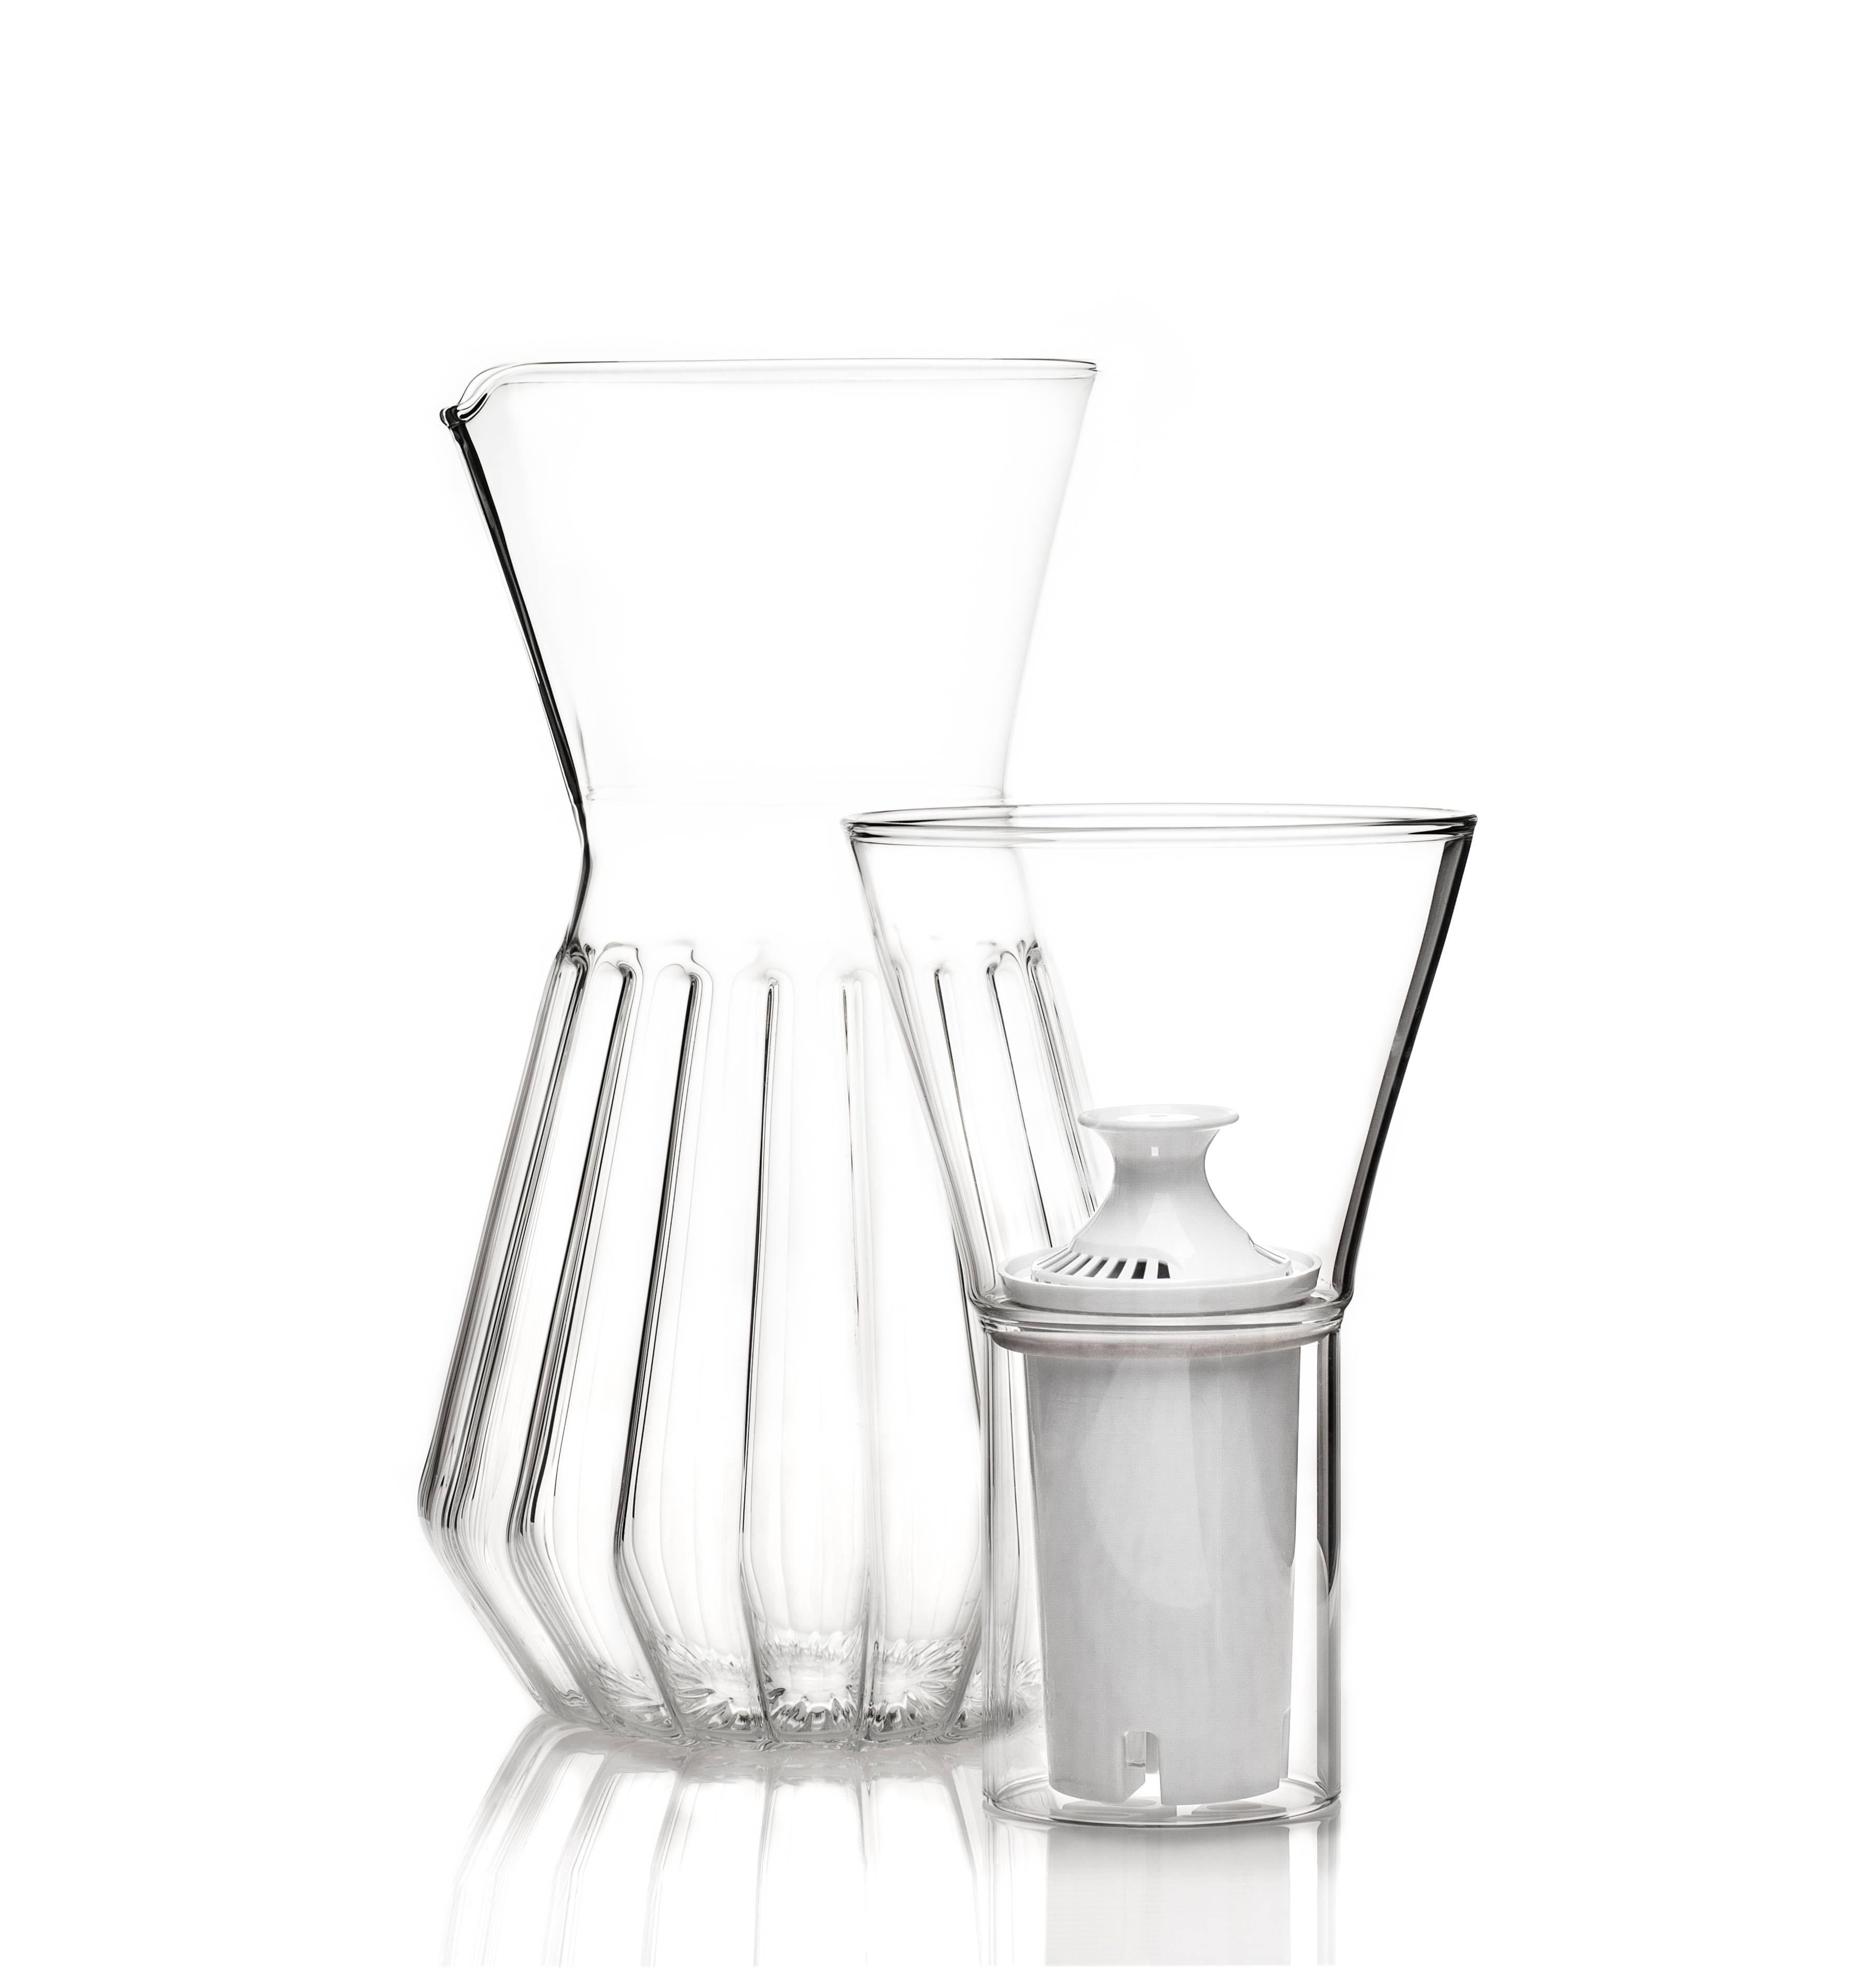 This set includes one Fluted Talise pitcher carafe and six Mixed Small Glasses. 

With a special technique that blends two types of glass, the fluted talise can be used with the funnel for water or without for non-filtered beverages. Made without